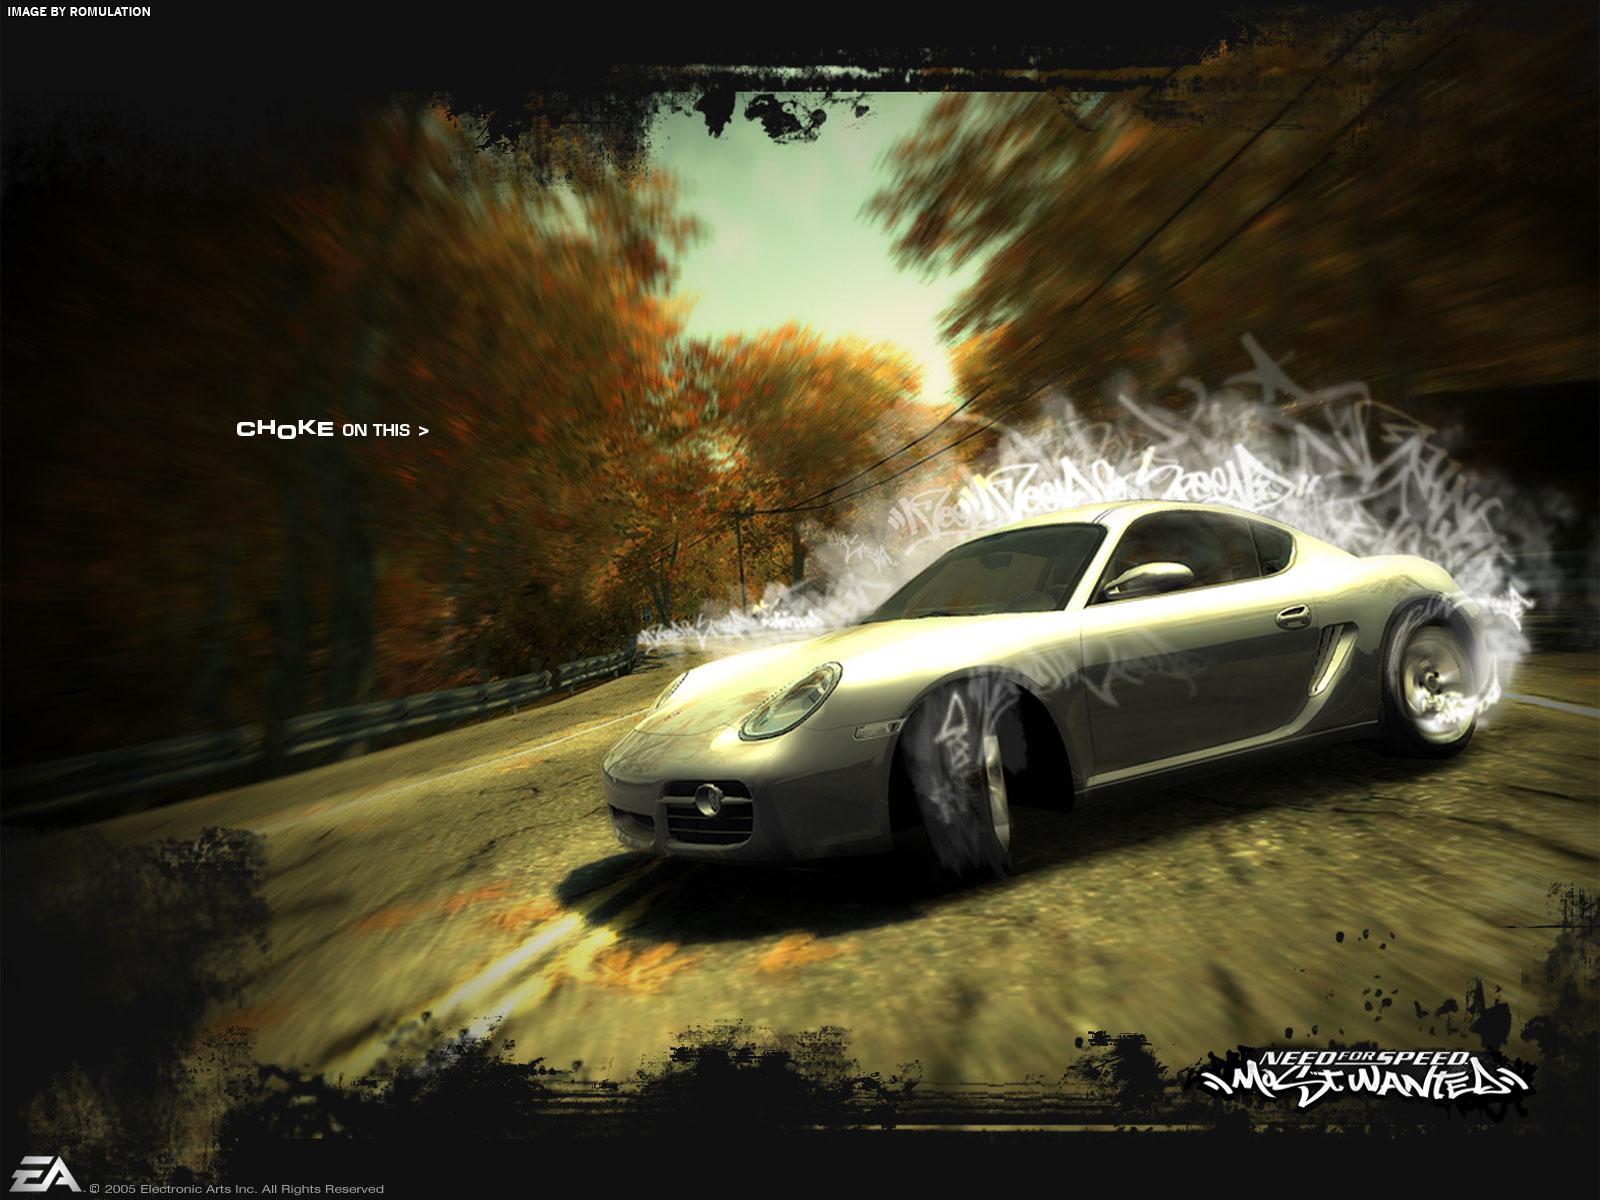 need for speed most wanted ps2